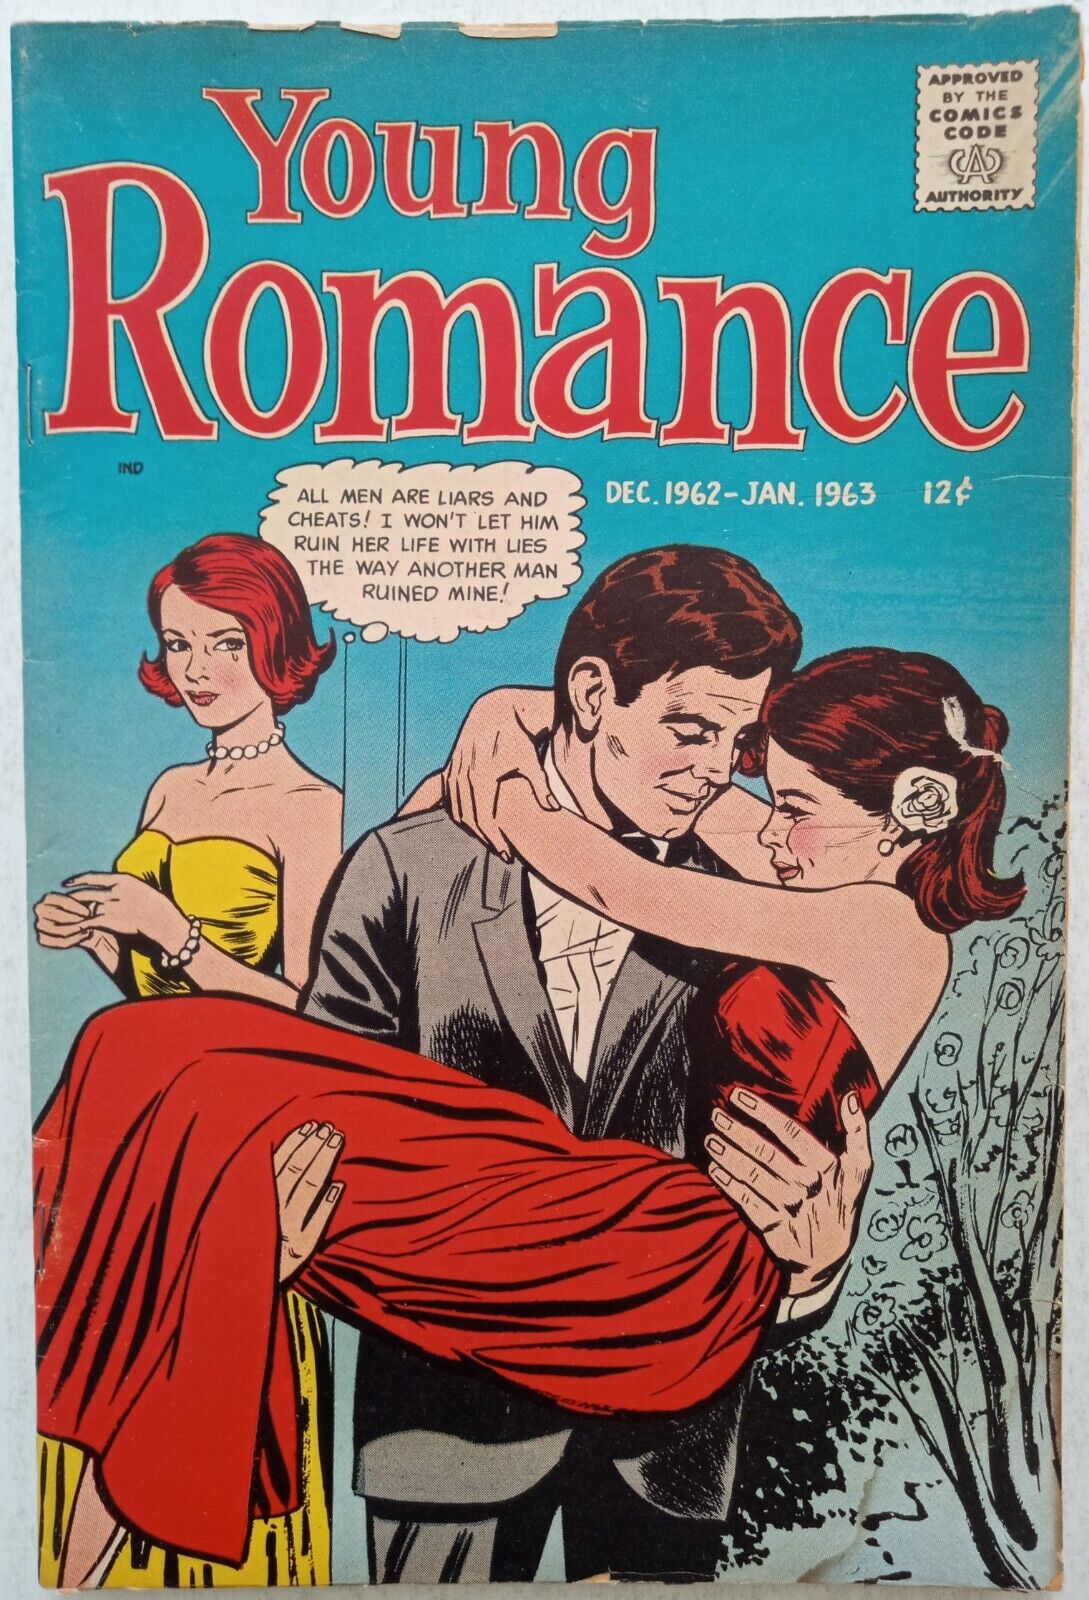 Feature Publications Young Romance Vol 16 #1 Silver Age 1962 Comic Book